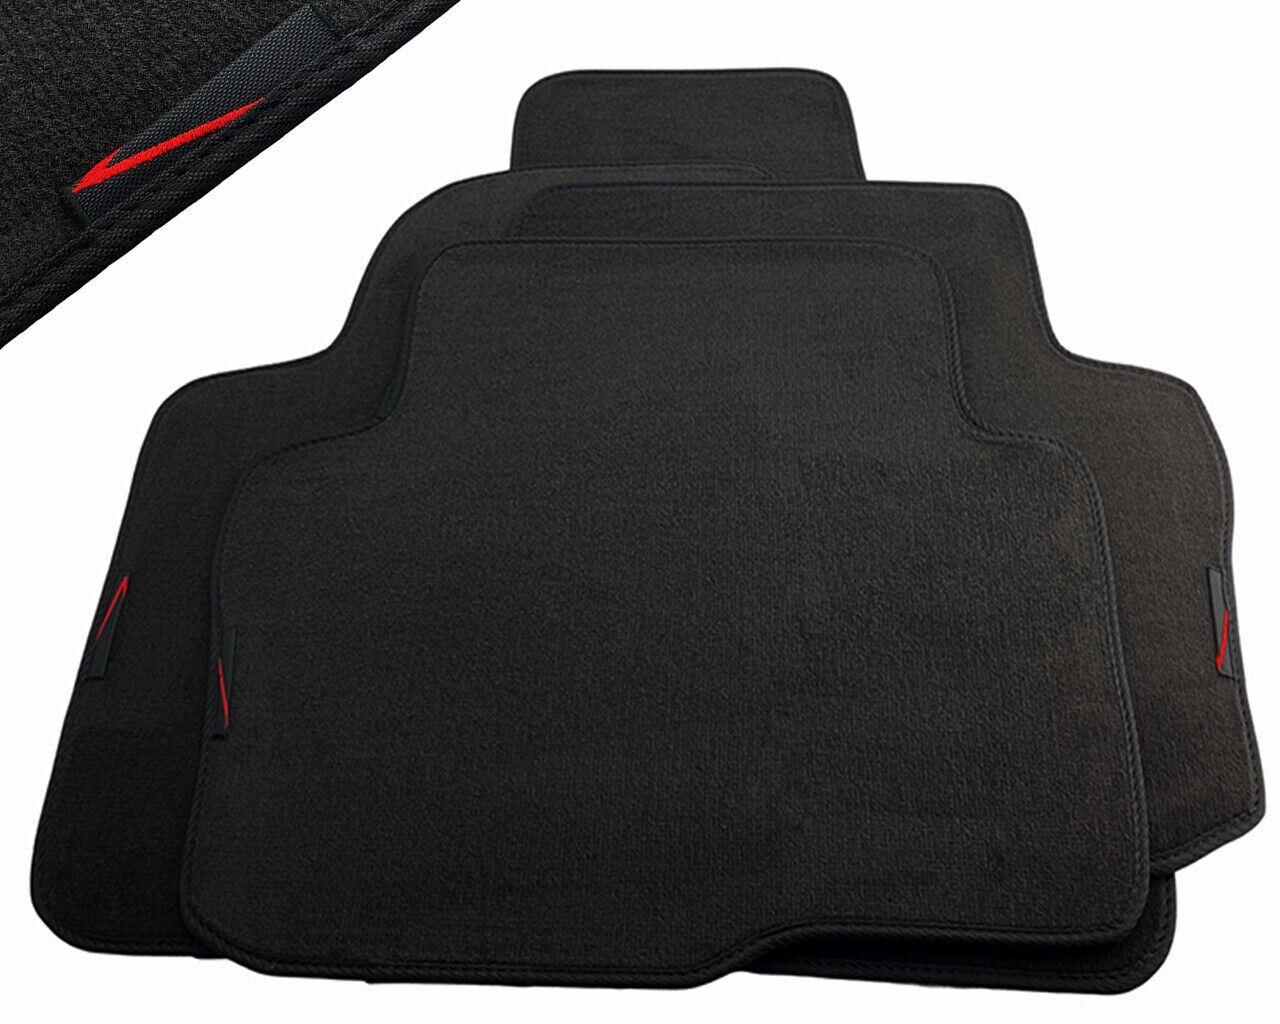 Floor Mats For Seat With Red Black Emblem Tailored Carpets Set For All Models 